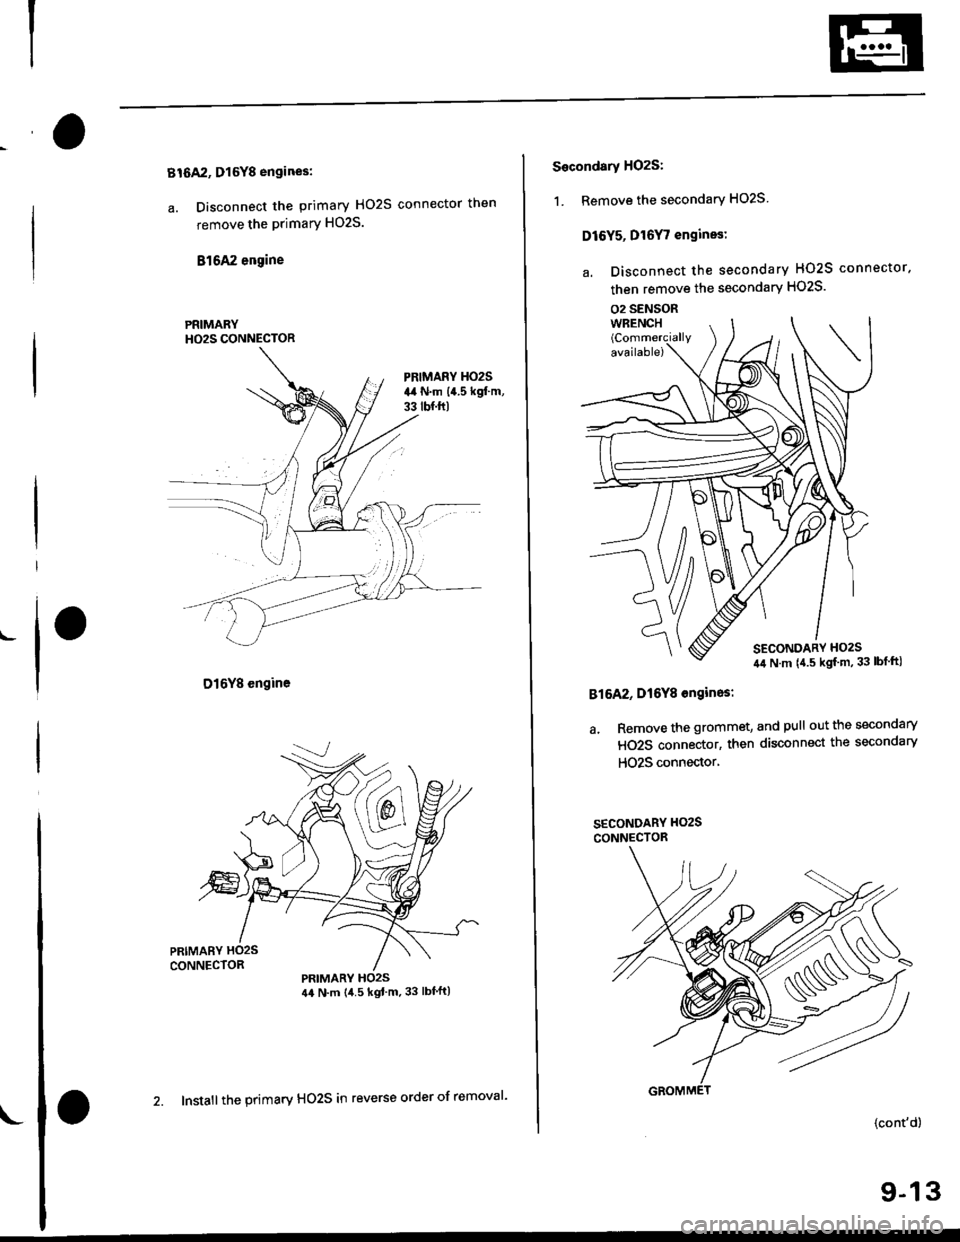 HONDA CIVIC 1997 6.G Workshop Manual Bt6A2, Dl6Y8 engines:
a. Disconnect the primary HO2S connector then
remove the primary HO2S.
816A2 engine
D16Y8 engine
PRIMARYH02S CONNECTOR
PRIMARY HO2S44 N.m {4.5 kgtm.33 lbfft)
L
2. Install the p